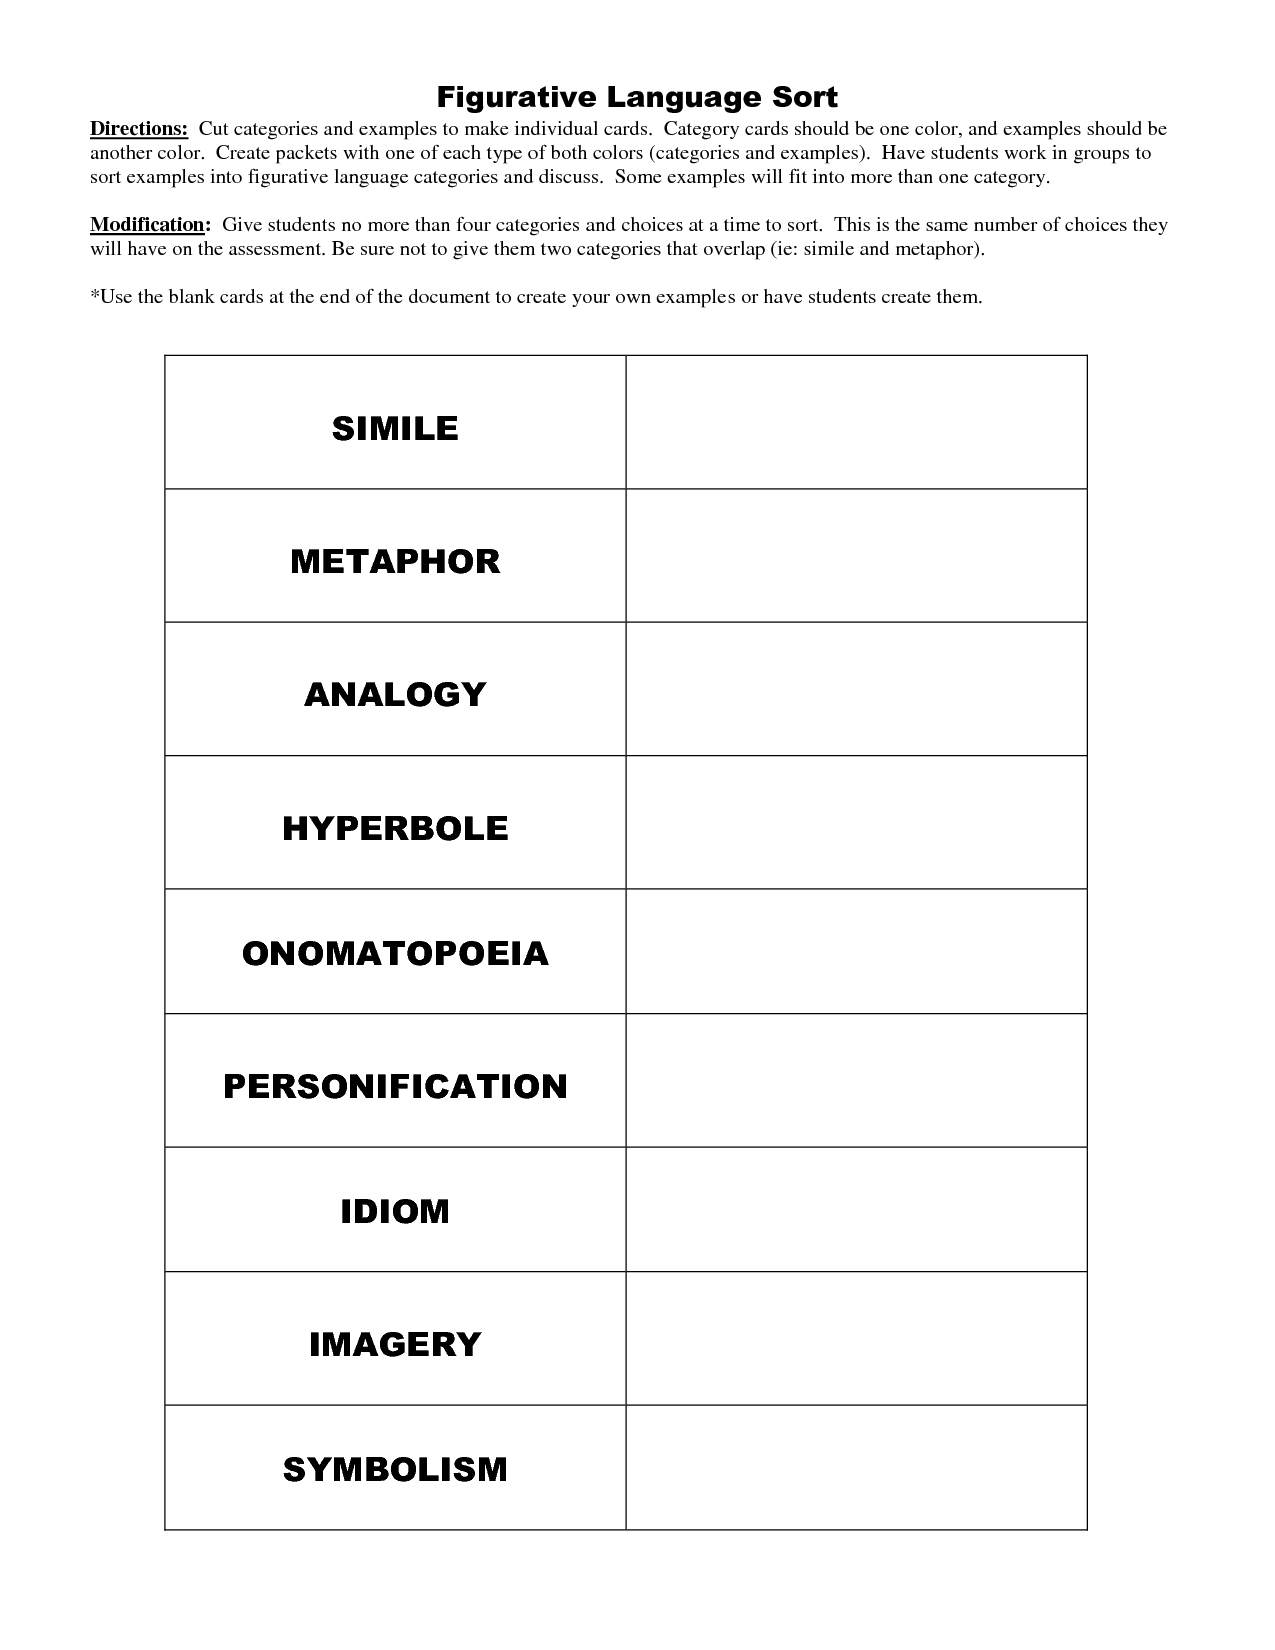 13-best-images-of-middle-school-art-lesson-worksheets-color-theory-art-worksheets-figurative